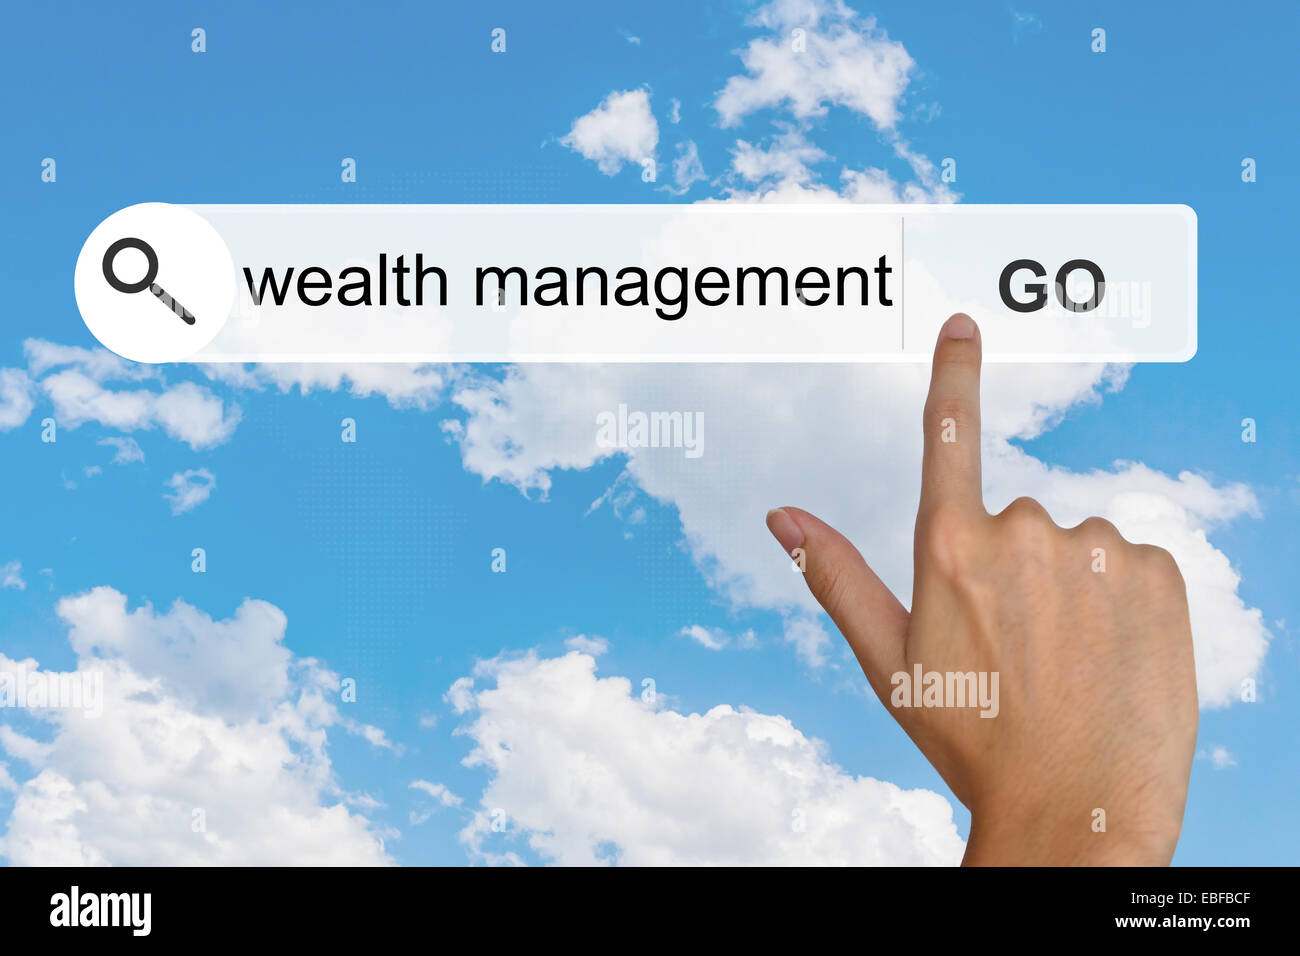 wealth management button on search toolbar Stock Photo